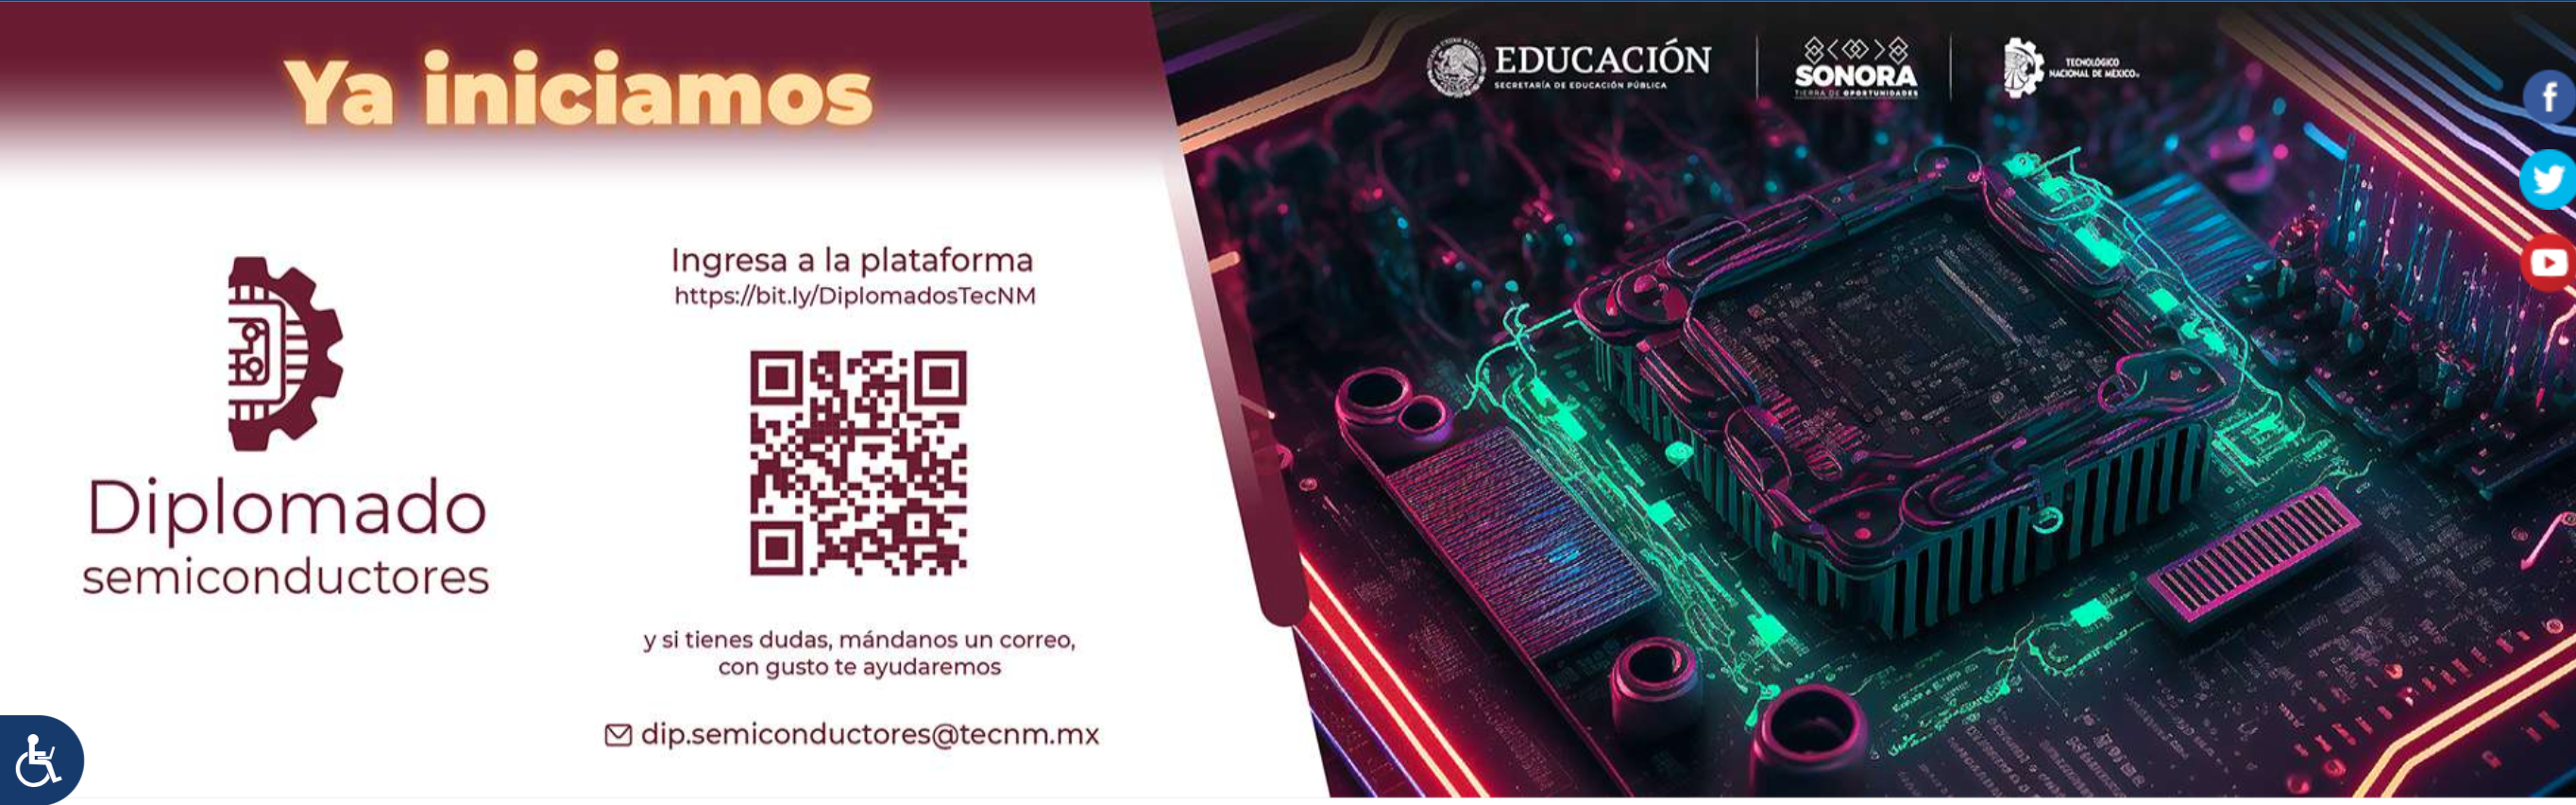 https://foprodesemiconductores.aguascalientes.tecnm.mx/login.php